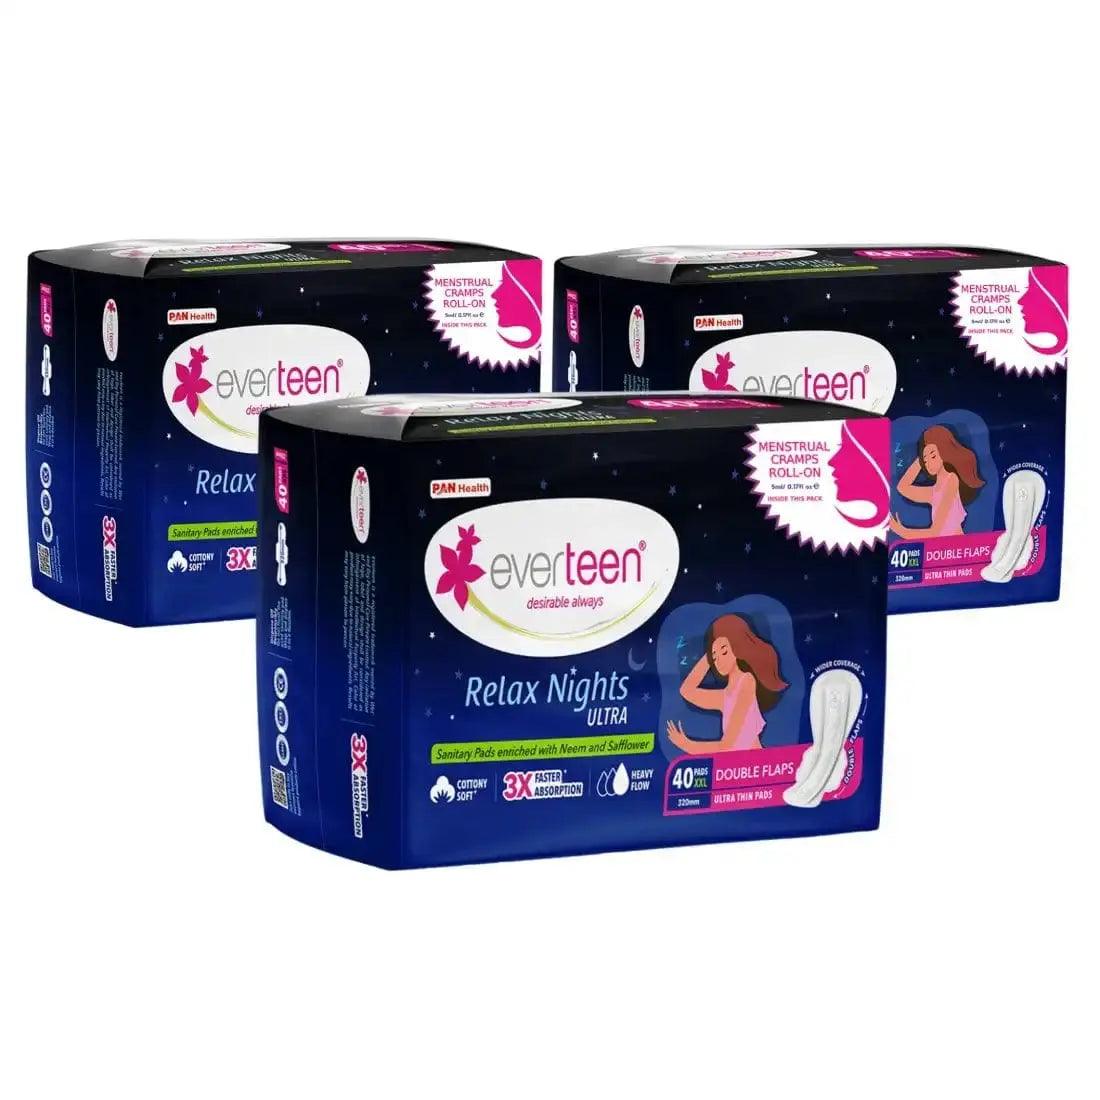 everteen XXL Relax Nights Ultra Thin 40 Sanitary Pads with Neem and Safflower, Menstrual Cramps Roll-On Inside Pack 7419870736606